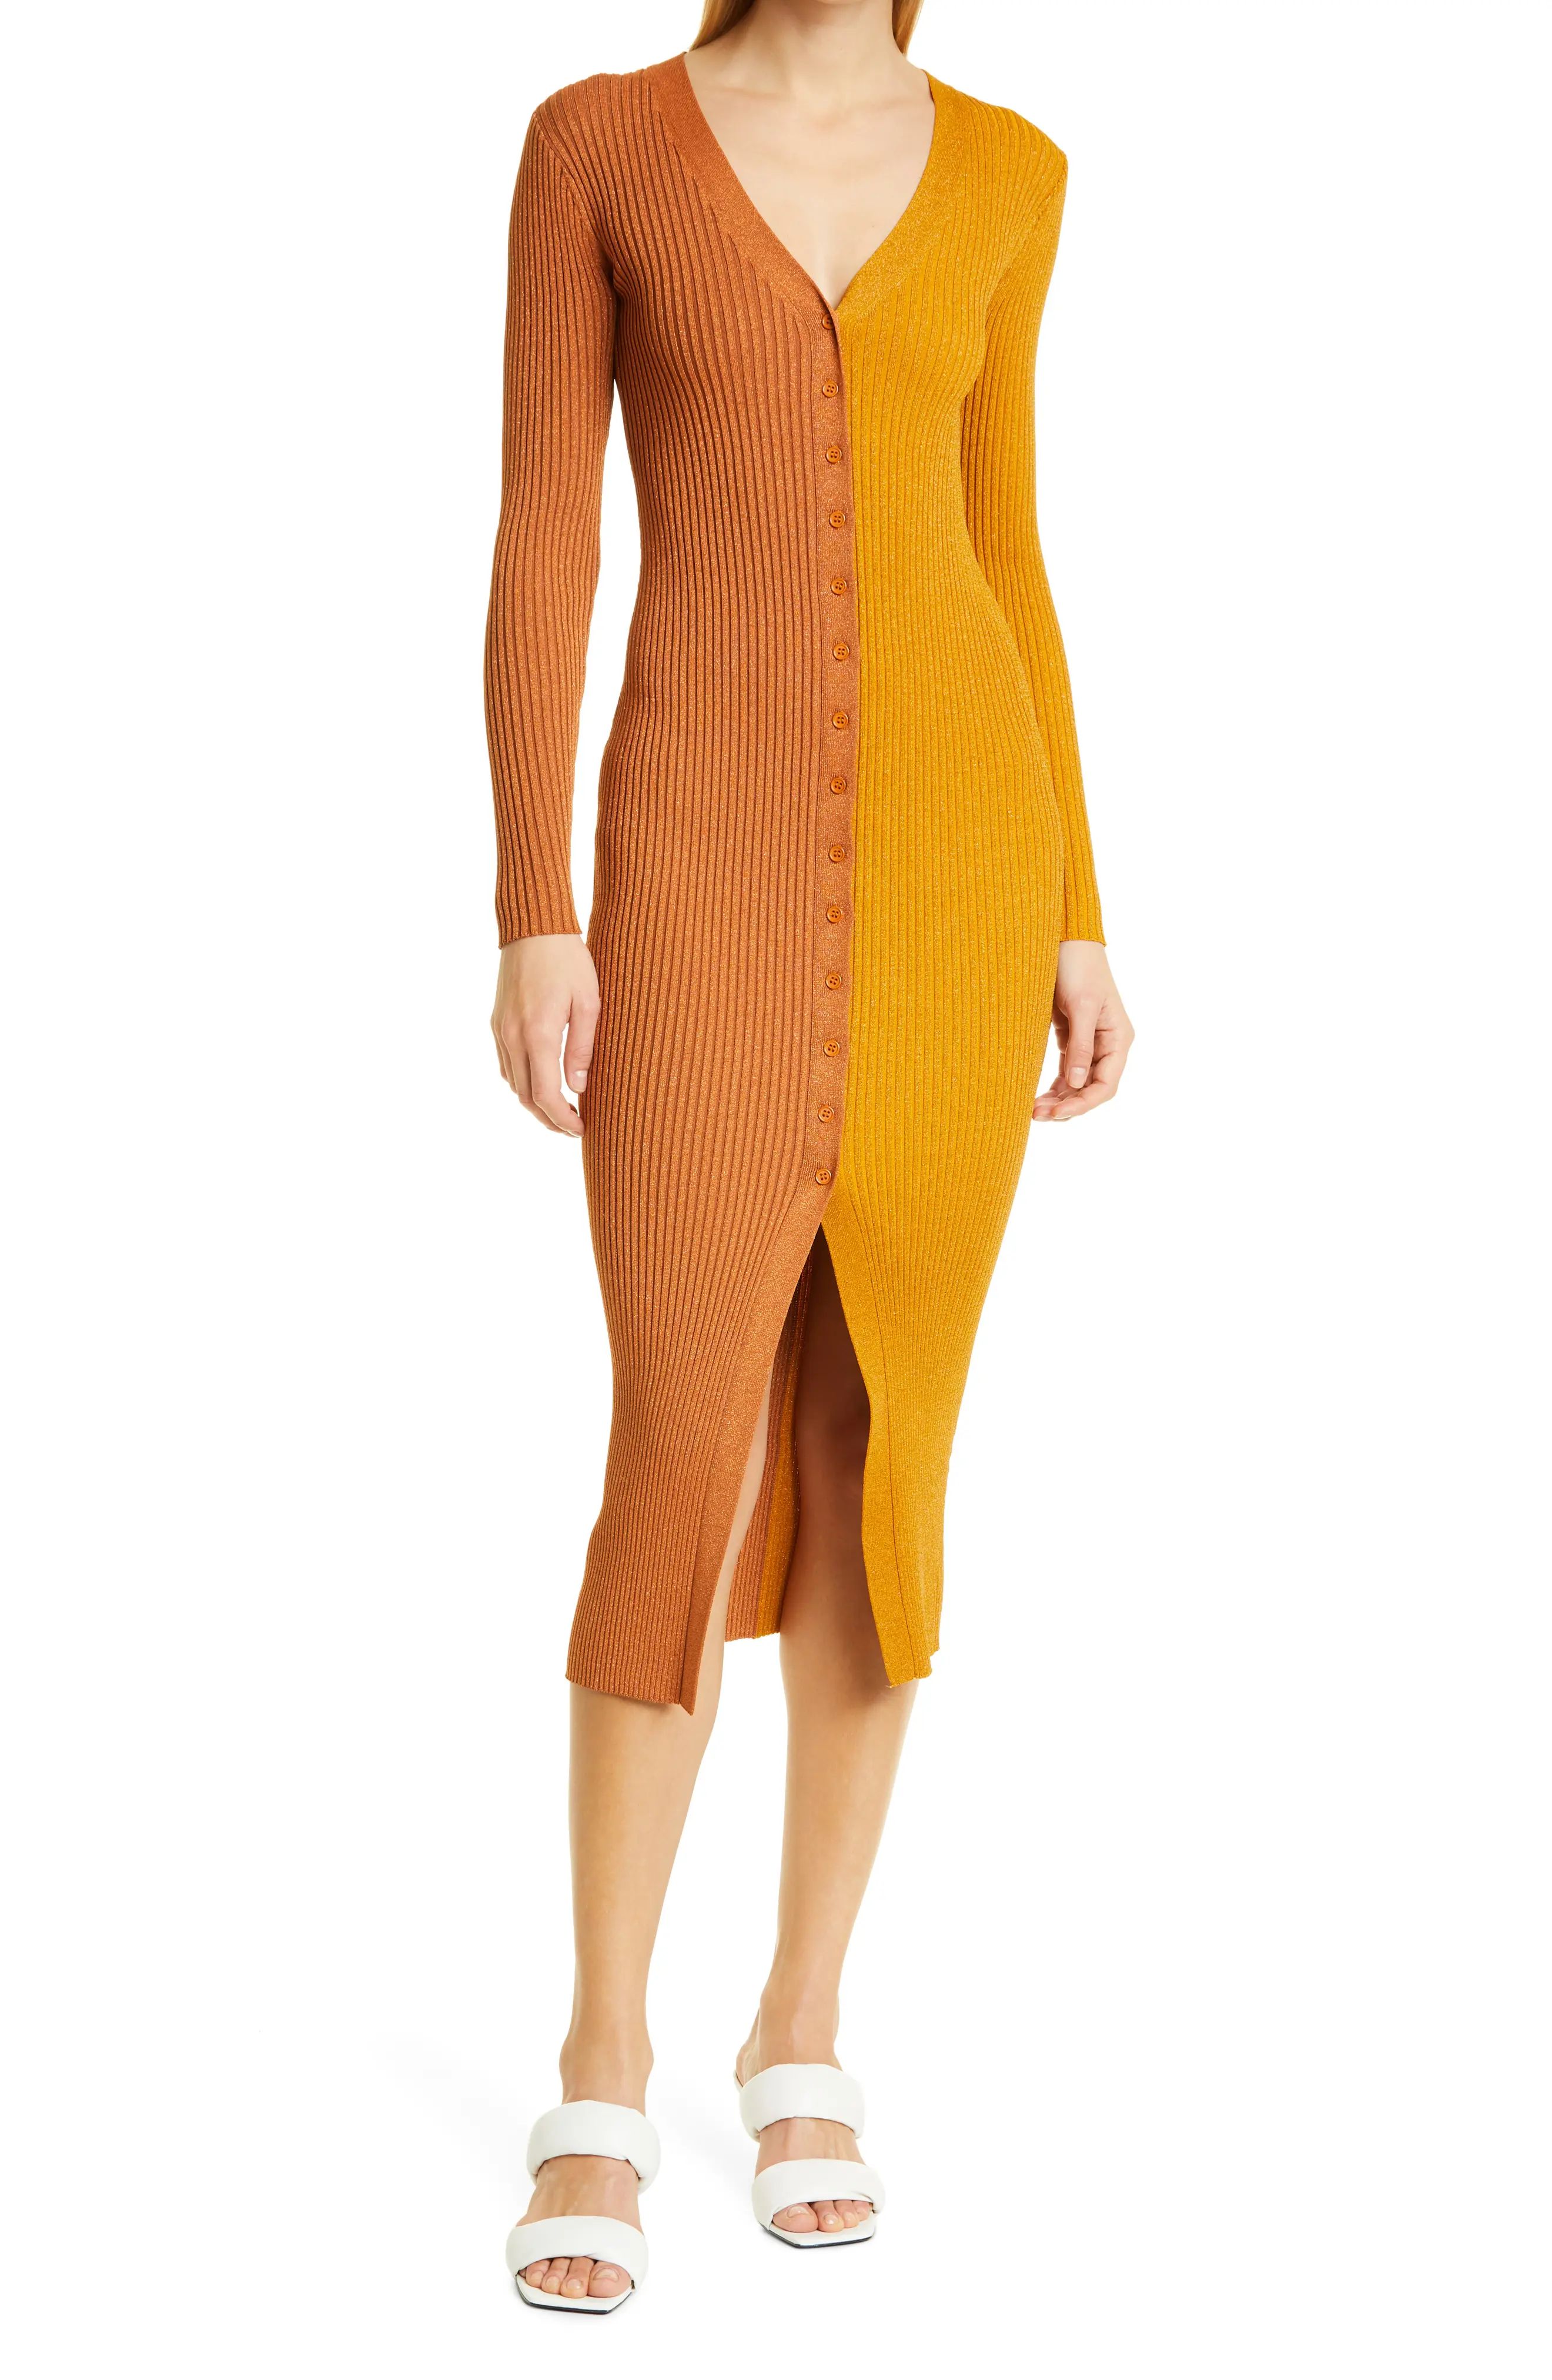 STAUD Shoko Long Sleeve Color Block Sweater Dress in Bronze/Ochre at Nordstrom, Size X-Large | Nordstrom